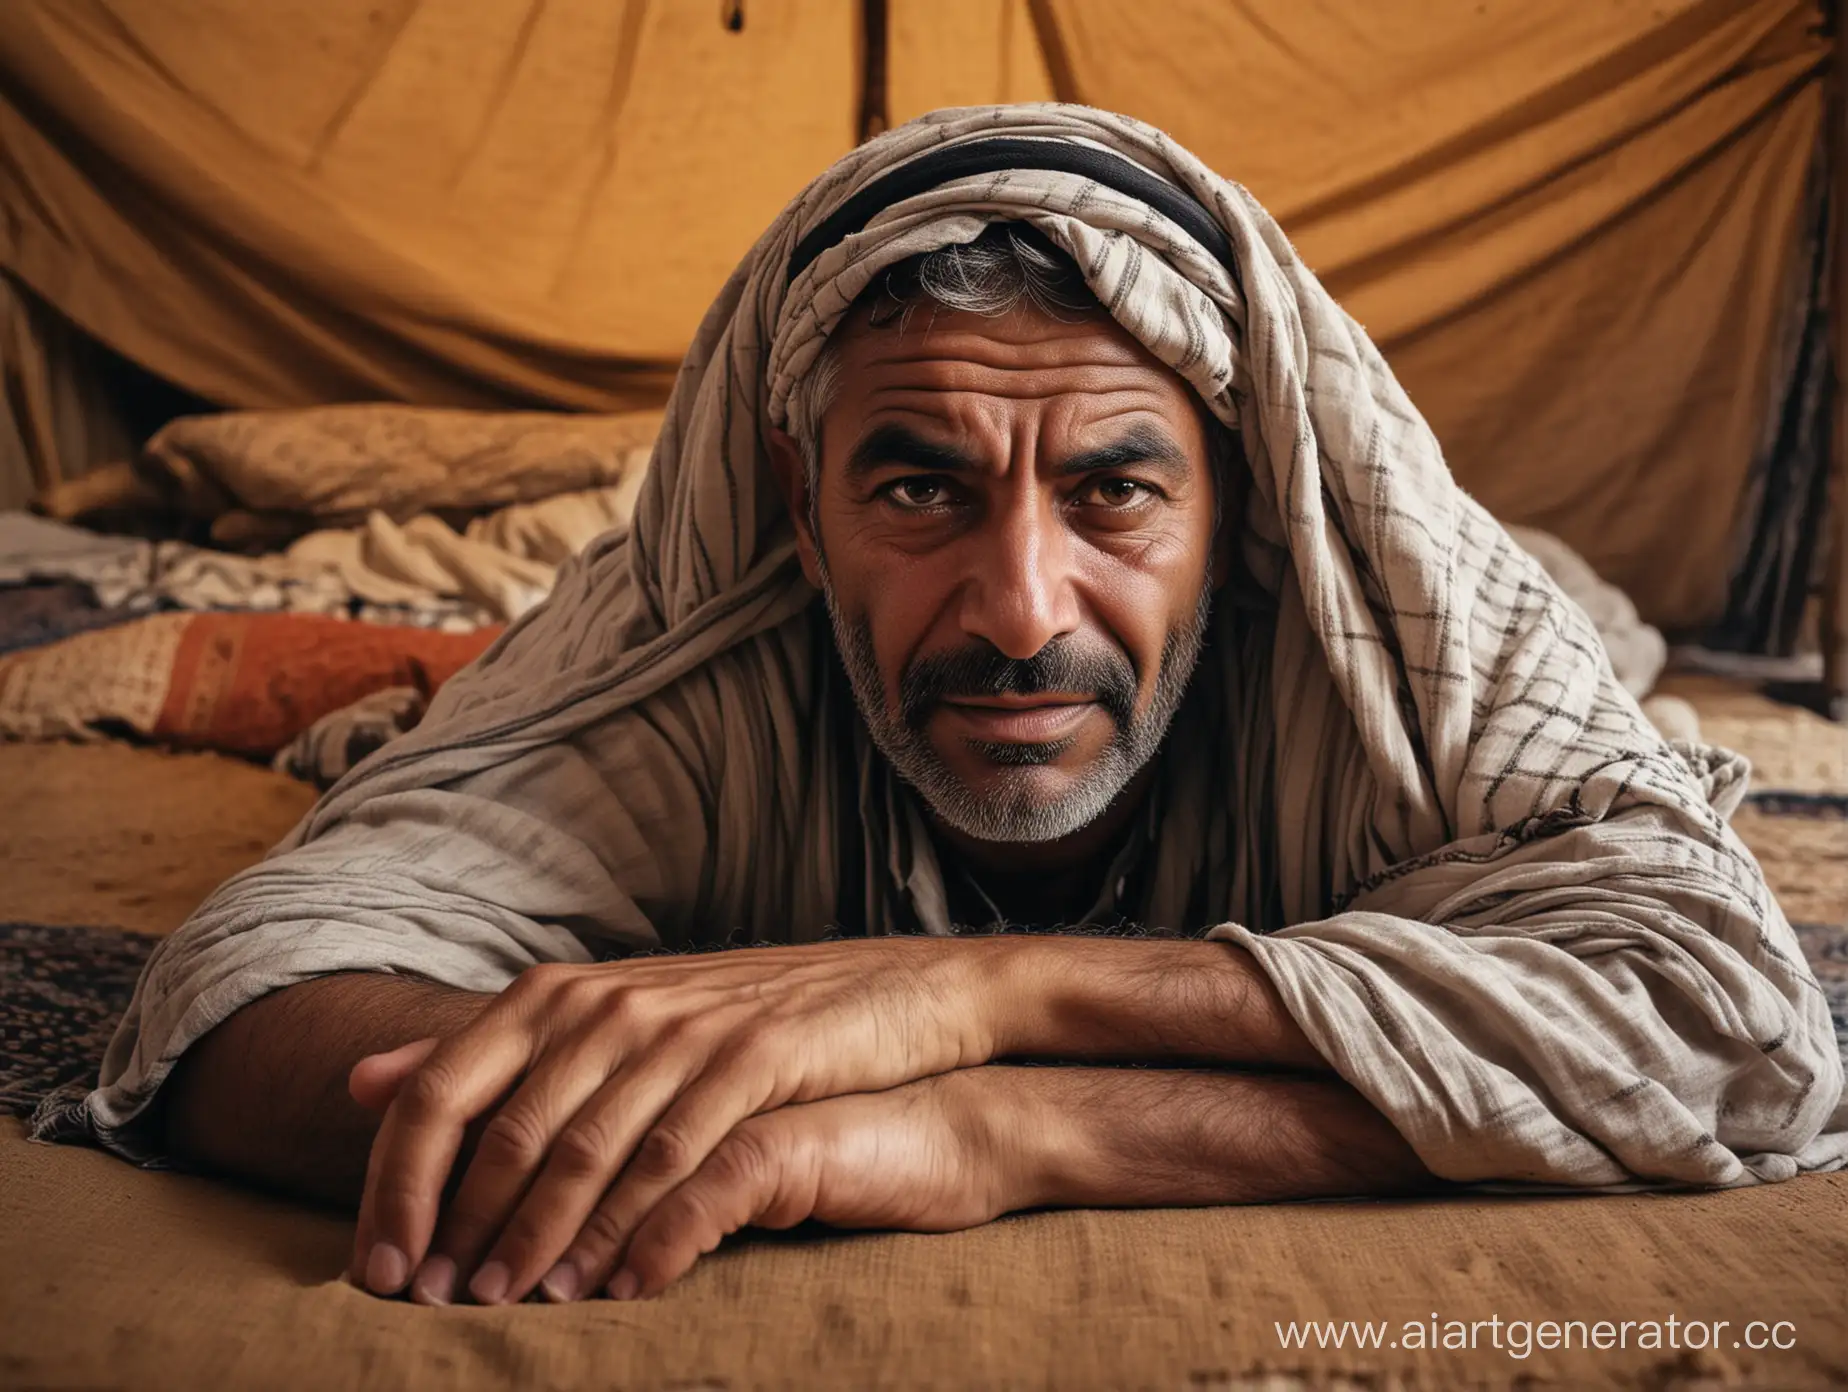 Sinister-Arab-Man-Resting-in-Spacious-Bedouin-Tent